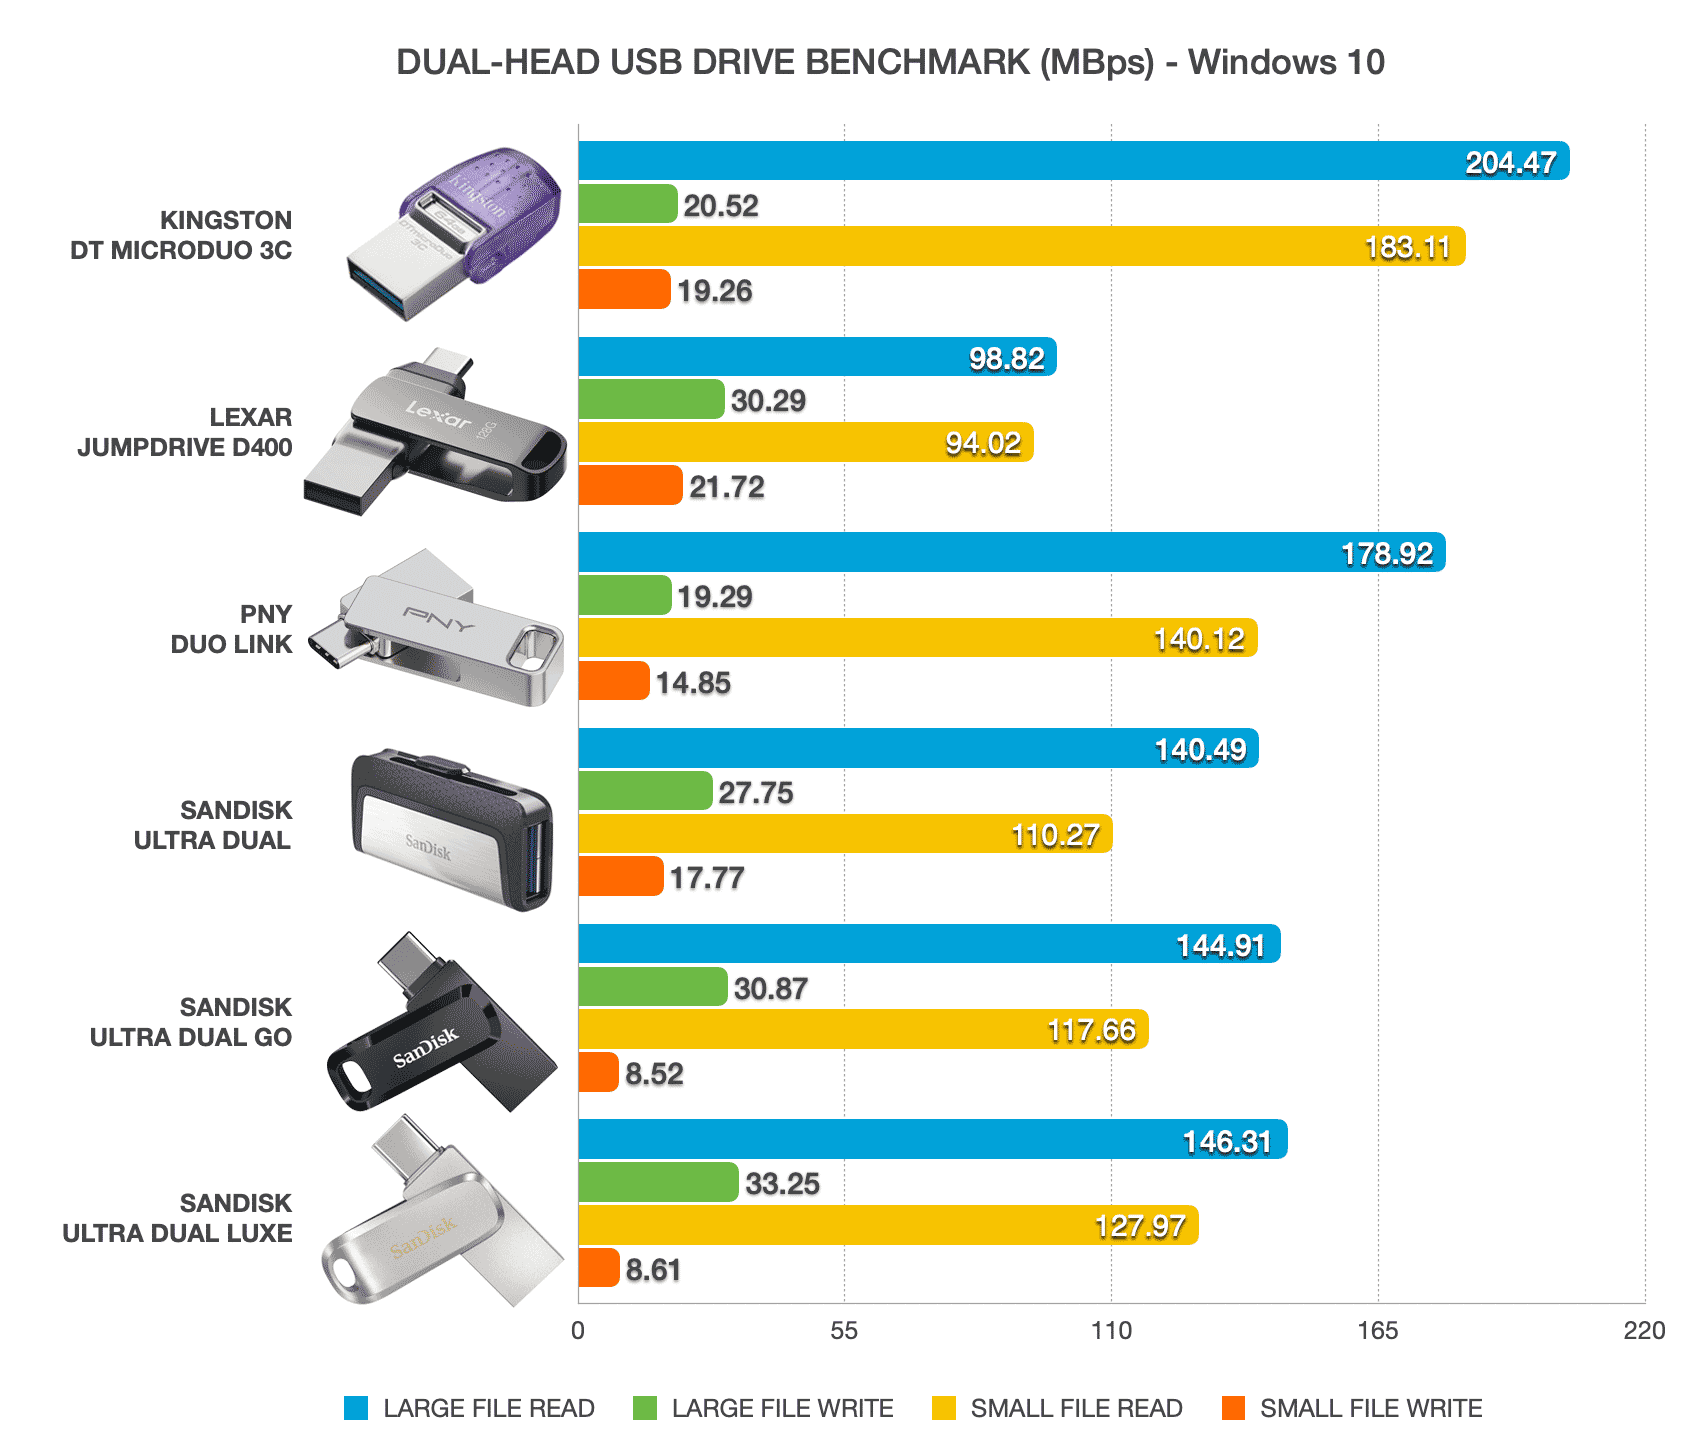 Bar chart comparing USB speeds between Kingston DataTraveler MicroDuo 3C, Lexar JumpDrive D400, PNY Duo Link, Sandisk Ultra Dual, Ultra Dual Go and Ultra Dual Luxe on Windows 10.